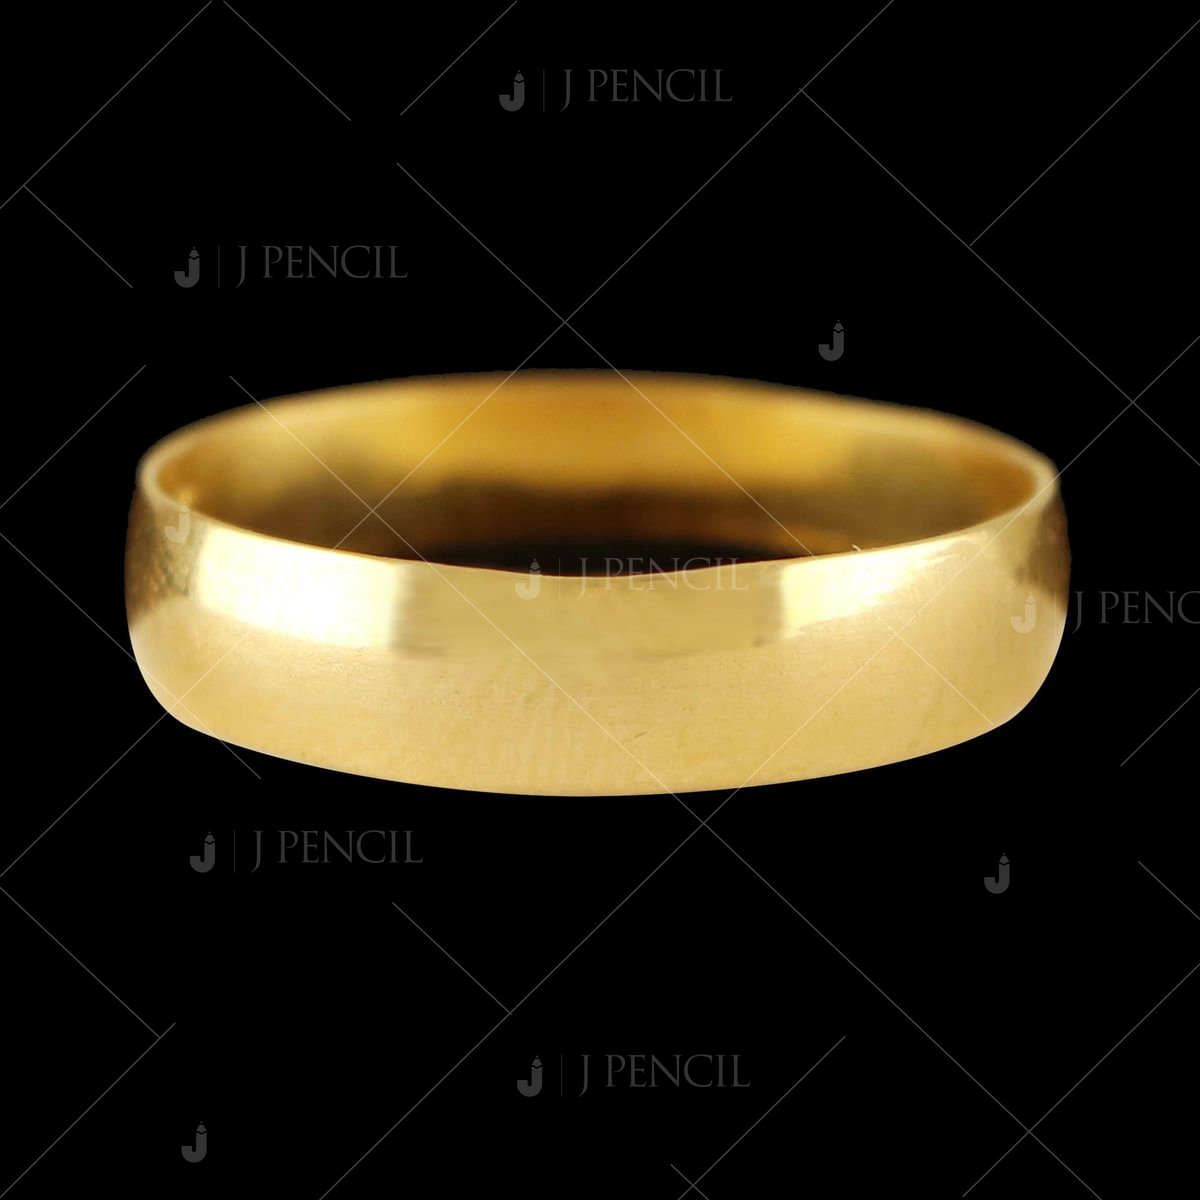 Gold Wedding Bands: The Complete Guide